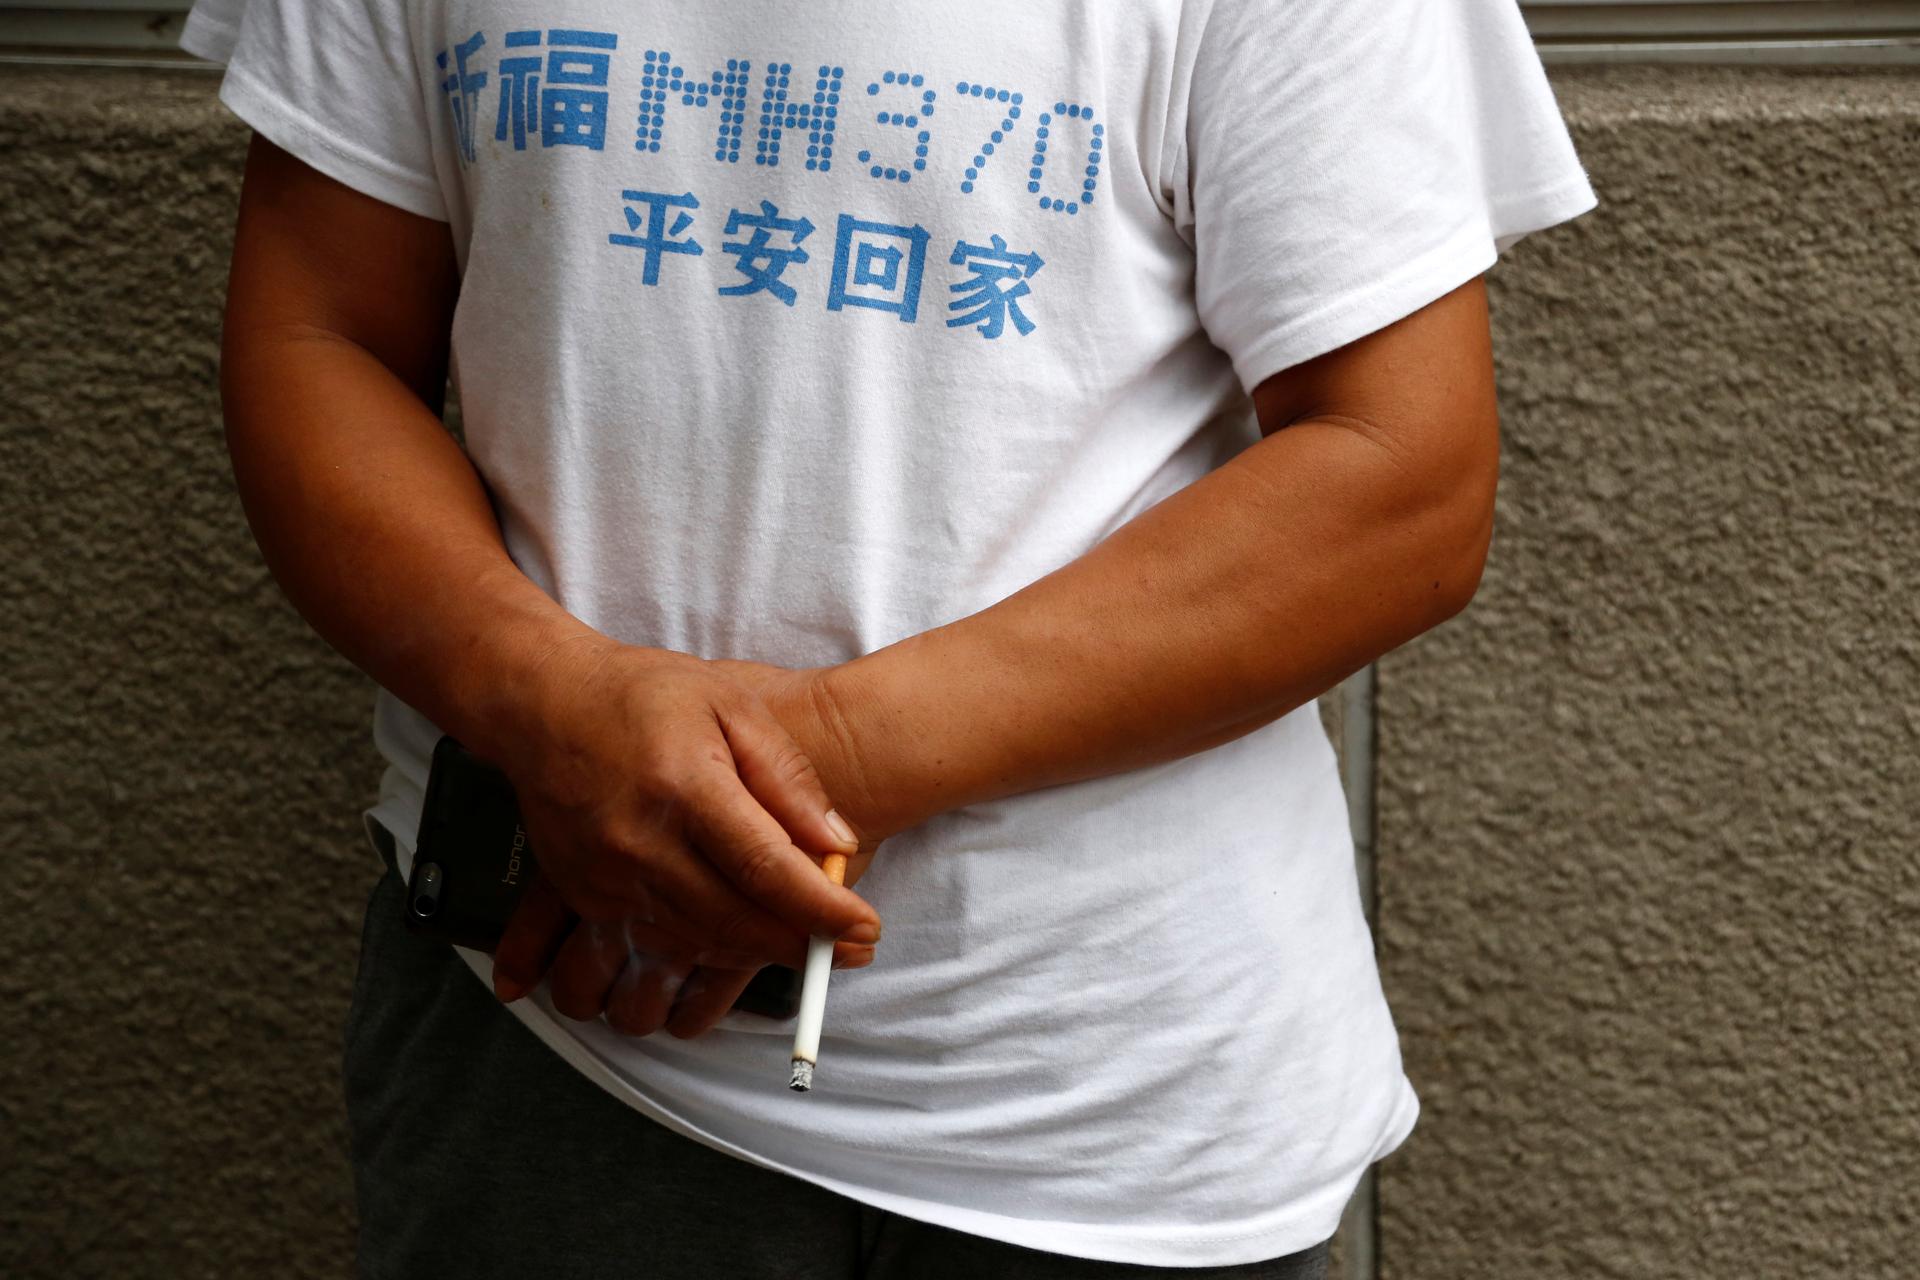 A man surnamed Lee who said his son was aboard the Malaysia Airlines flight MH370 that went missing in 2014 smokes during a protest outside the Chinese foreign ministry